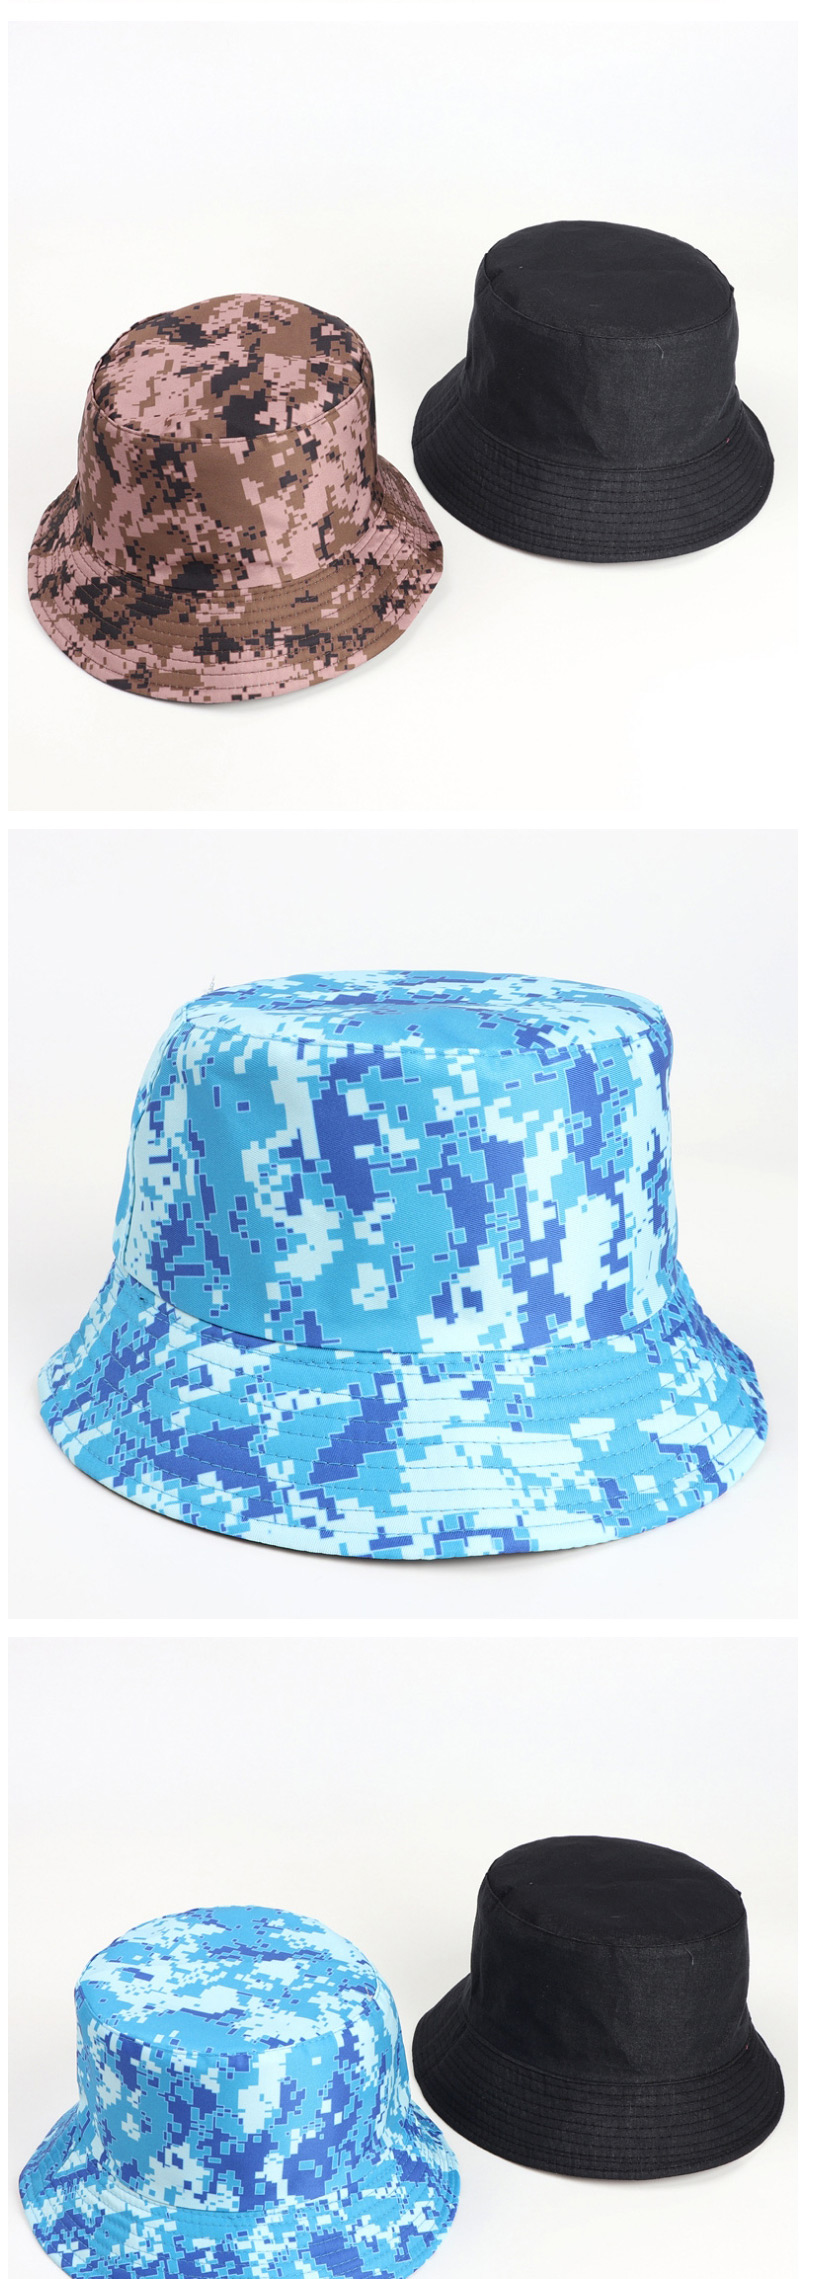 Fashion Digital Camouflage-green Printed Double-sided Multicolor Camouflage Fisherman Hat,Sun Hats